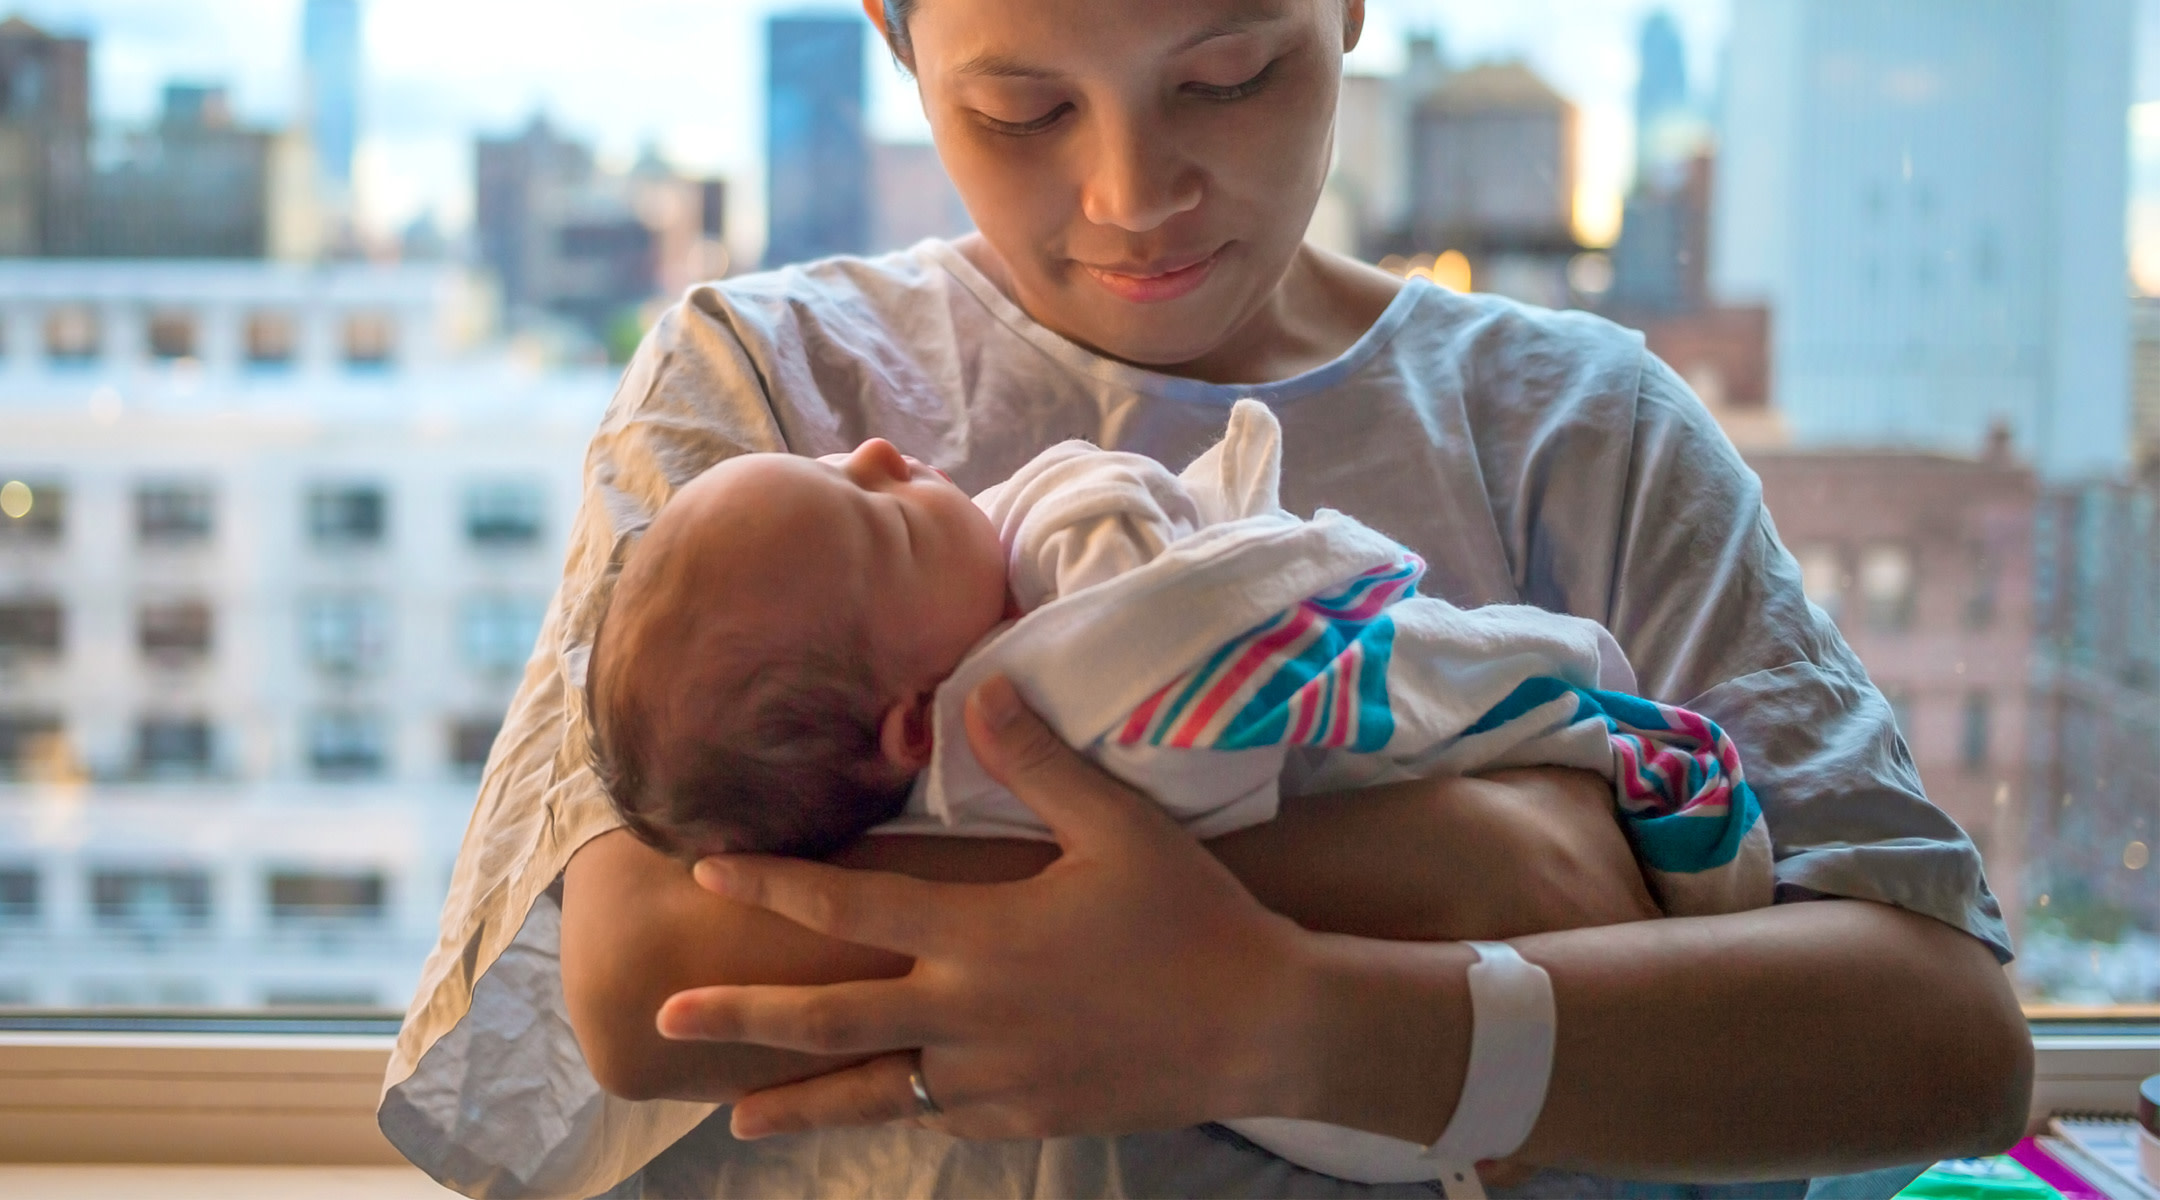 new mom at hospital after giving birth the newborn